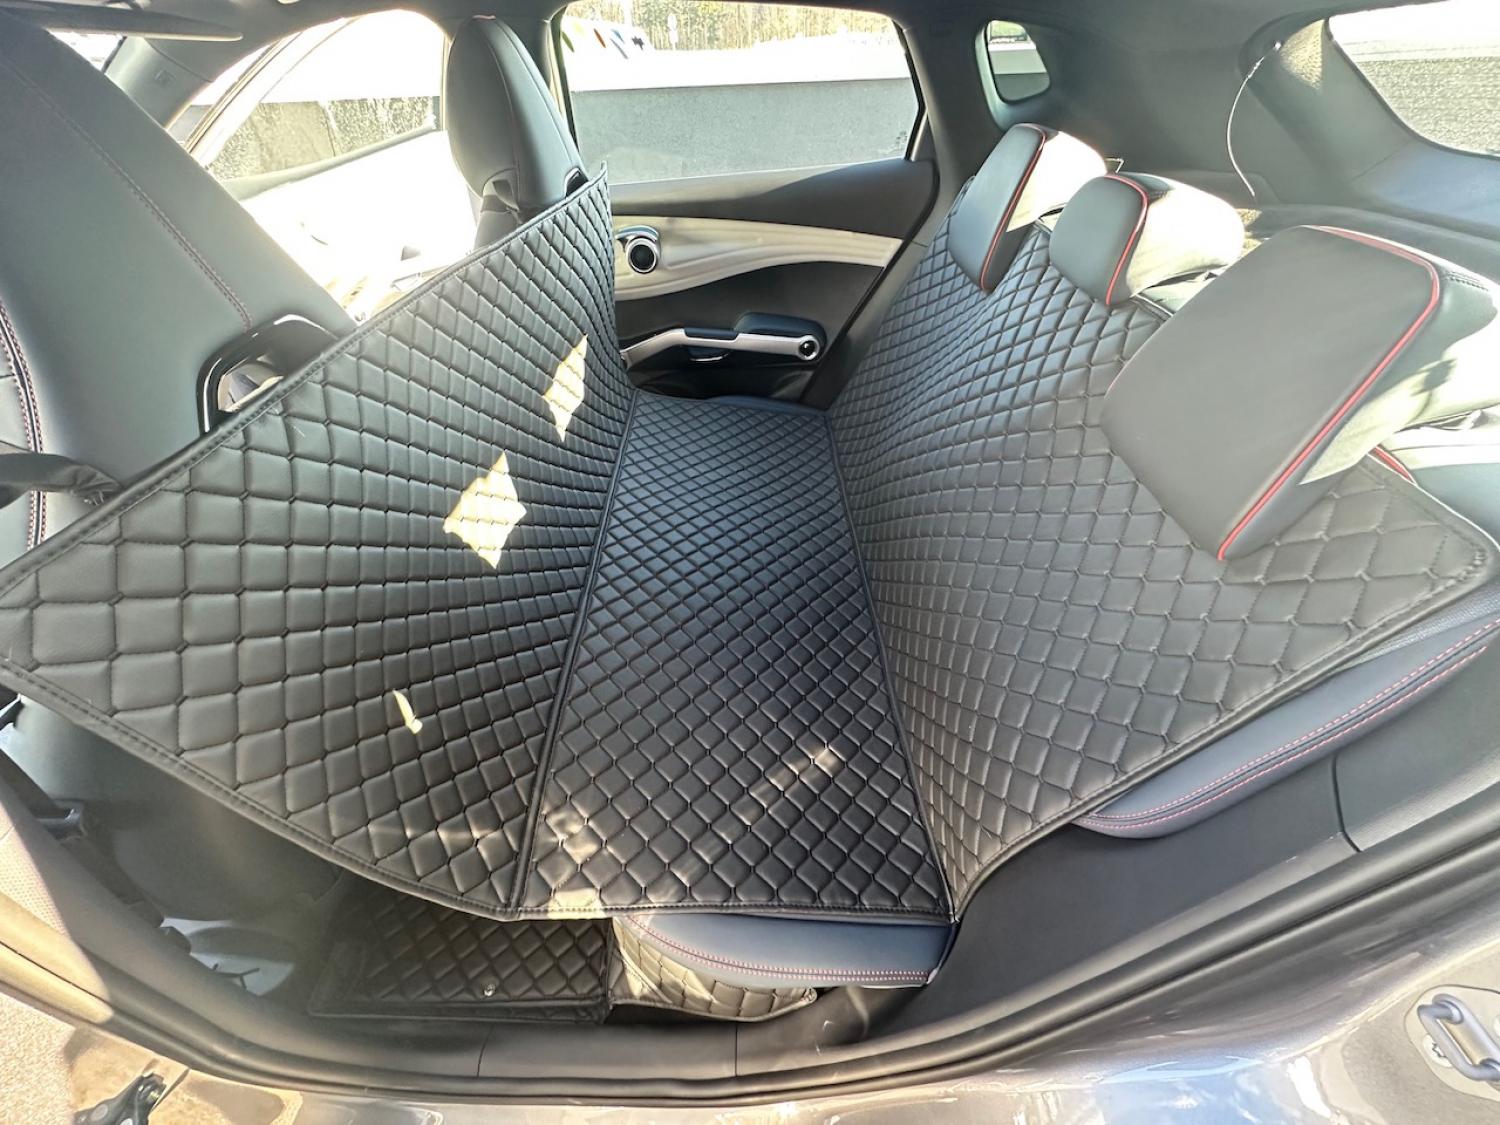 CARSTYLER® Back Seat Cover Geeignet Für Ford Mustang 6. Generation 2019-2022